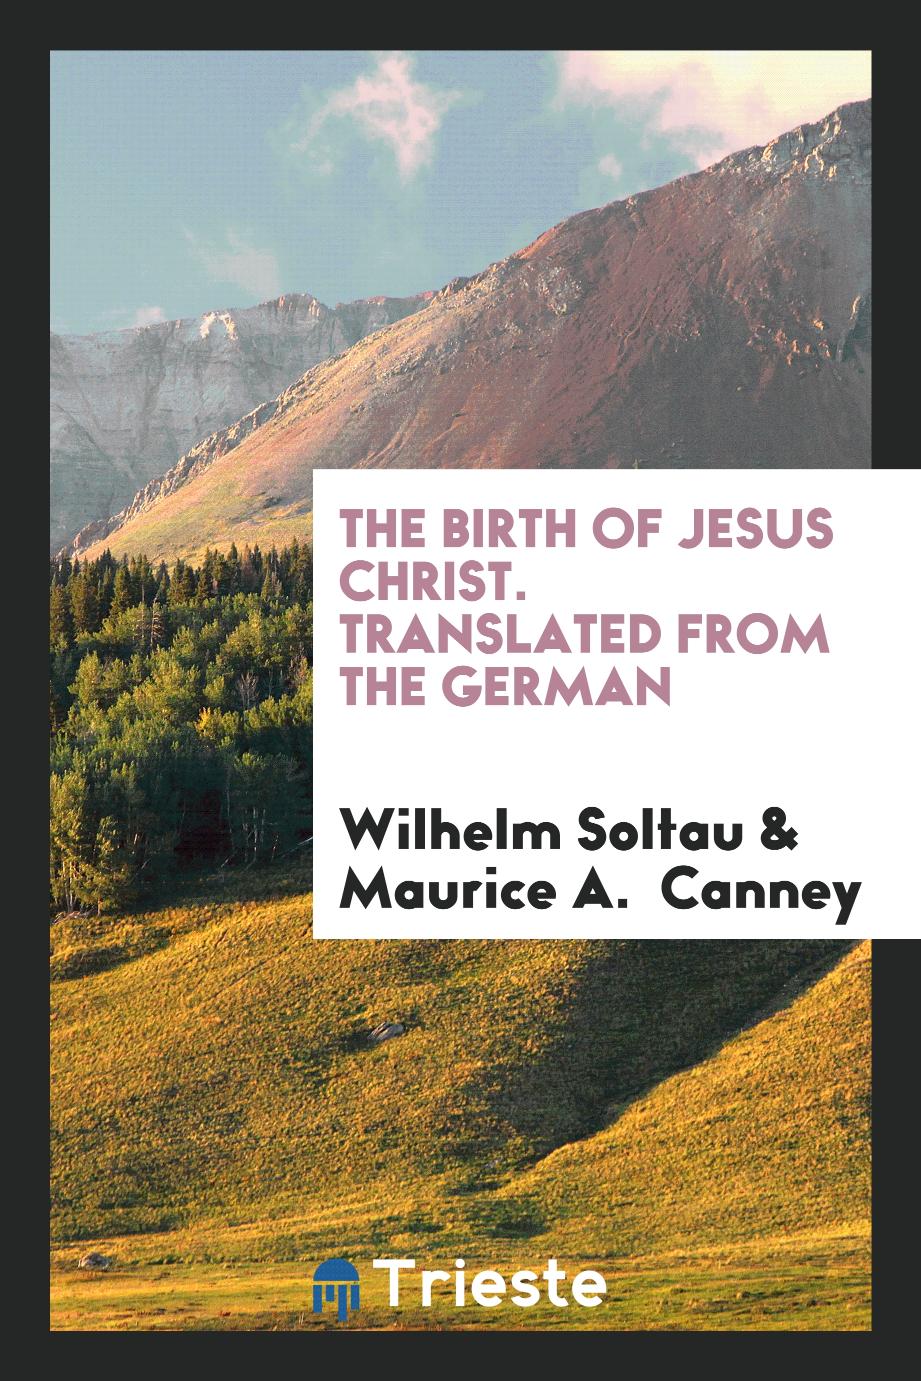 The Birth of Jesus Christ. Translated from the German